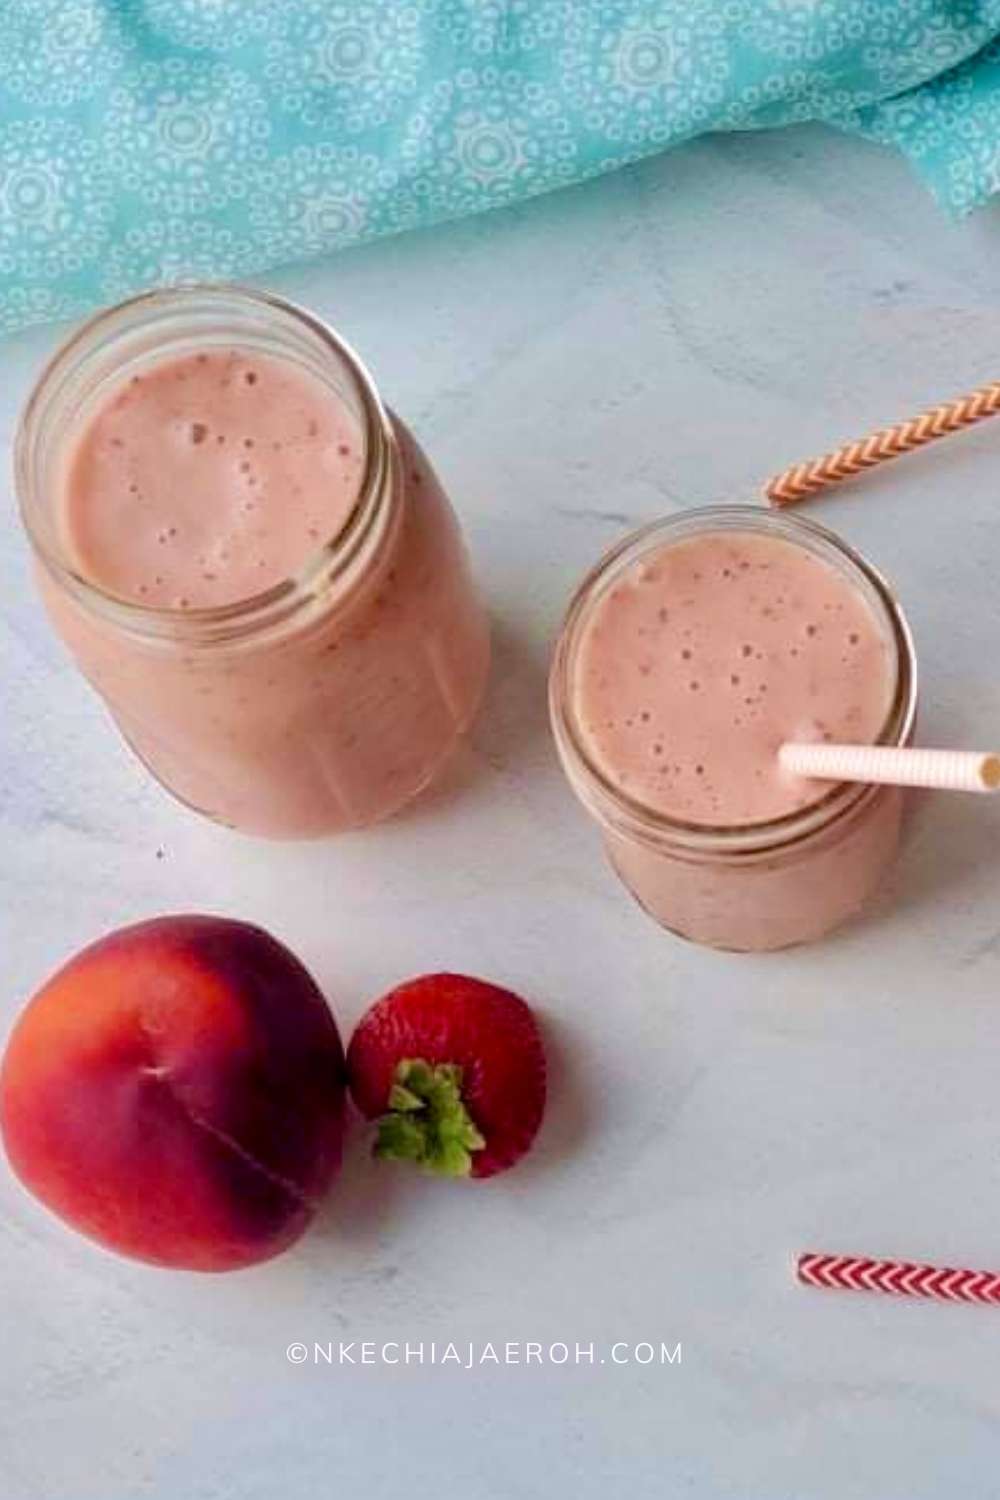 Healthy peach and strawberry smoothie recipe is super easy to make, tasty, and refreshing! This nourishing breakfast smoothie is made with only five ingredients - frozen peaches, frozen strawberry, frozen, yogurt and orange juice! Though this is a vegetarian smoothie recipe, you can easily make it vegan by substituting Greek yogurt with a dairy-free yogurt. #Smoothies #breakfastsmoothie #healthysmoothie #peachsmoothie #strawberrysmoothie